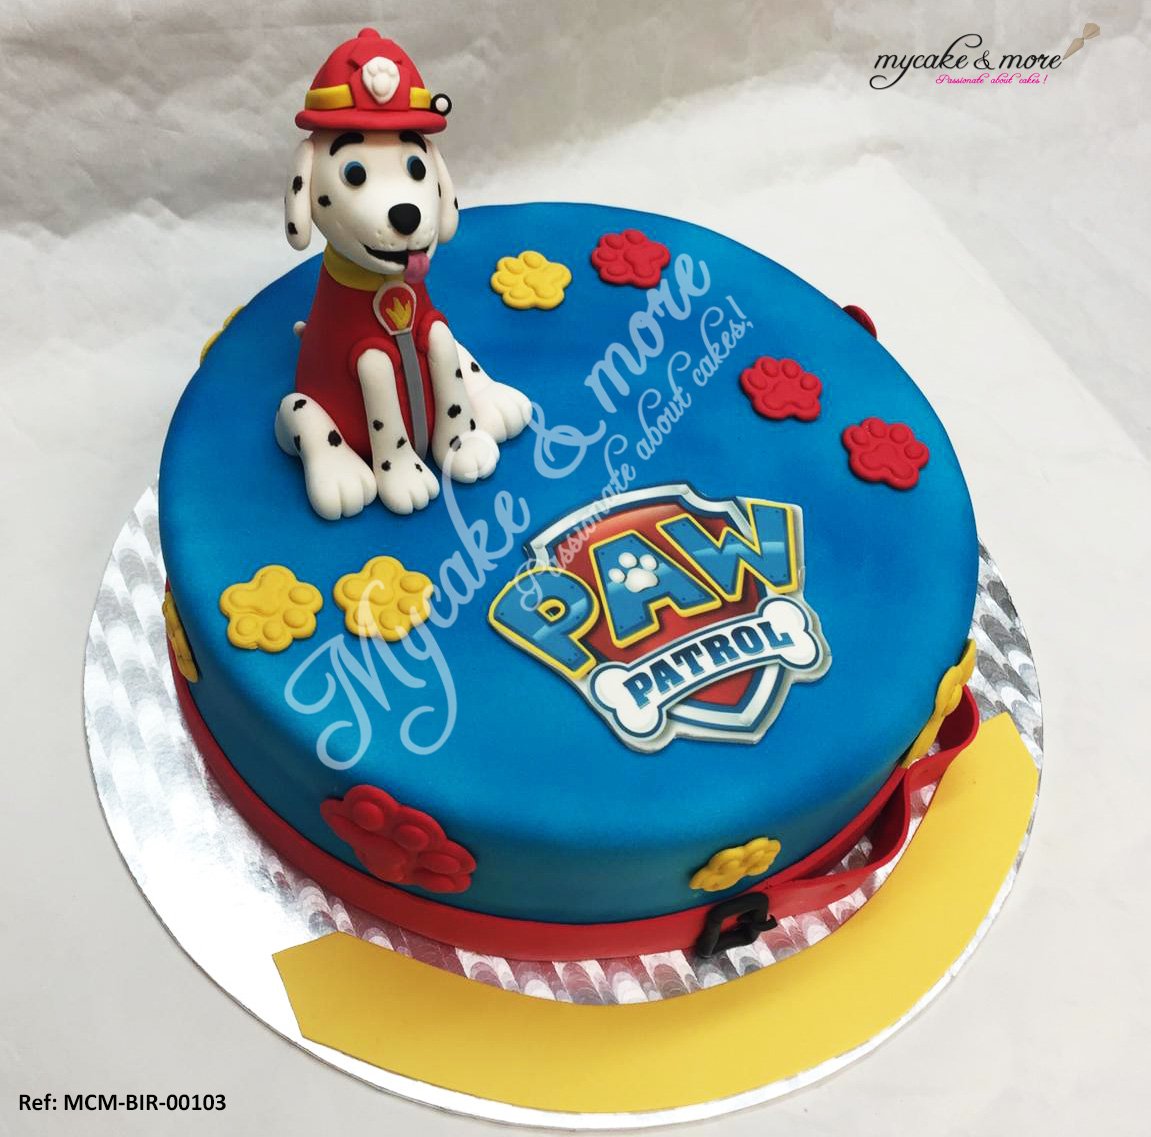 Mycake & more on these Paw Patrol Figures we made and cakes they have ended up on! . . #handmade #handmadecakes #bespokecakes #PawPatrol #cake #caketoppers #birthdaycake https://t.co/0M1hoUvj0x" /